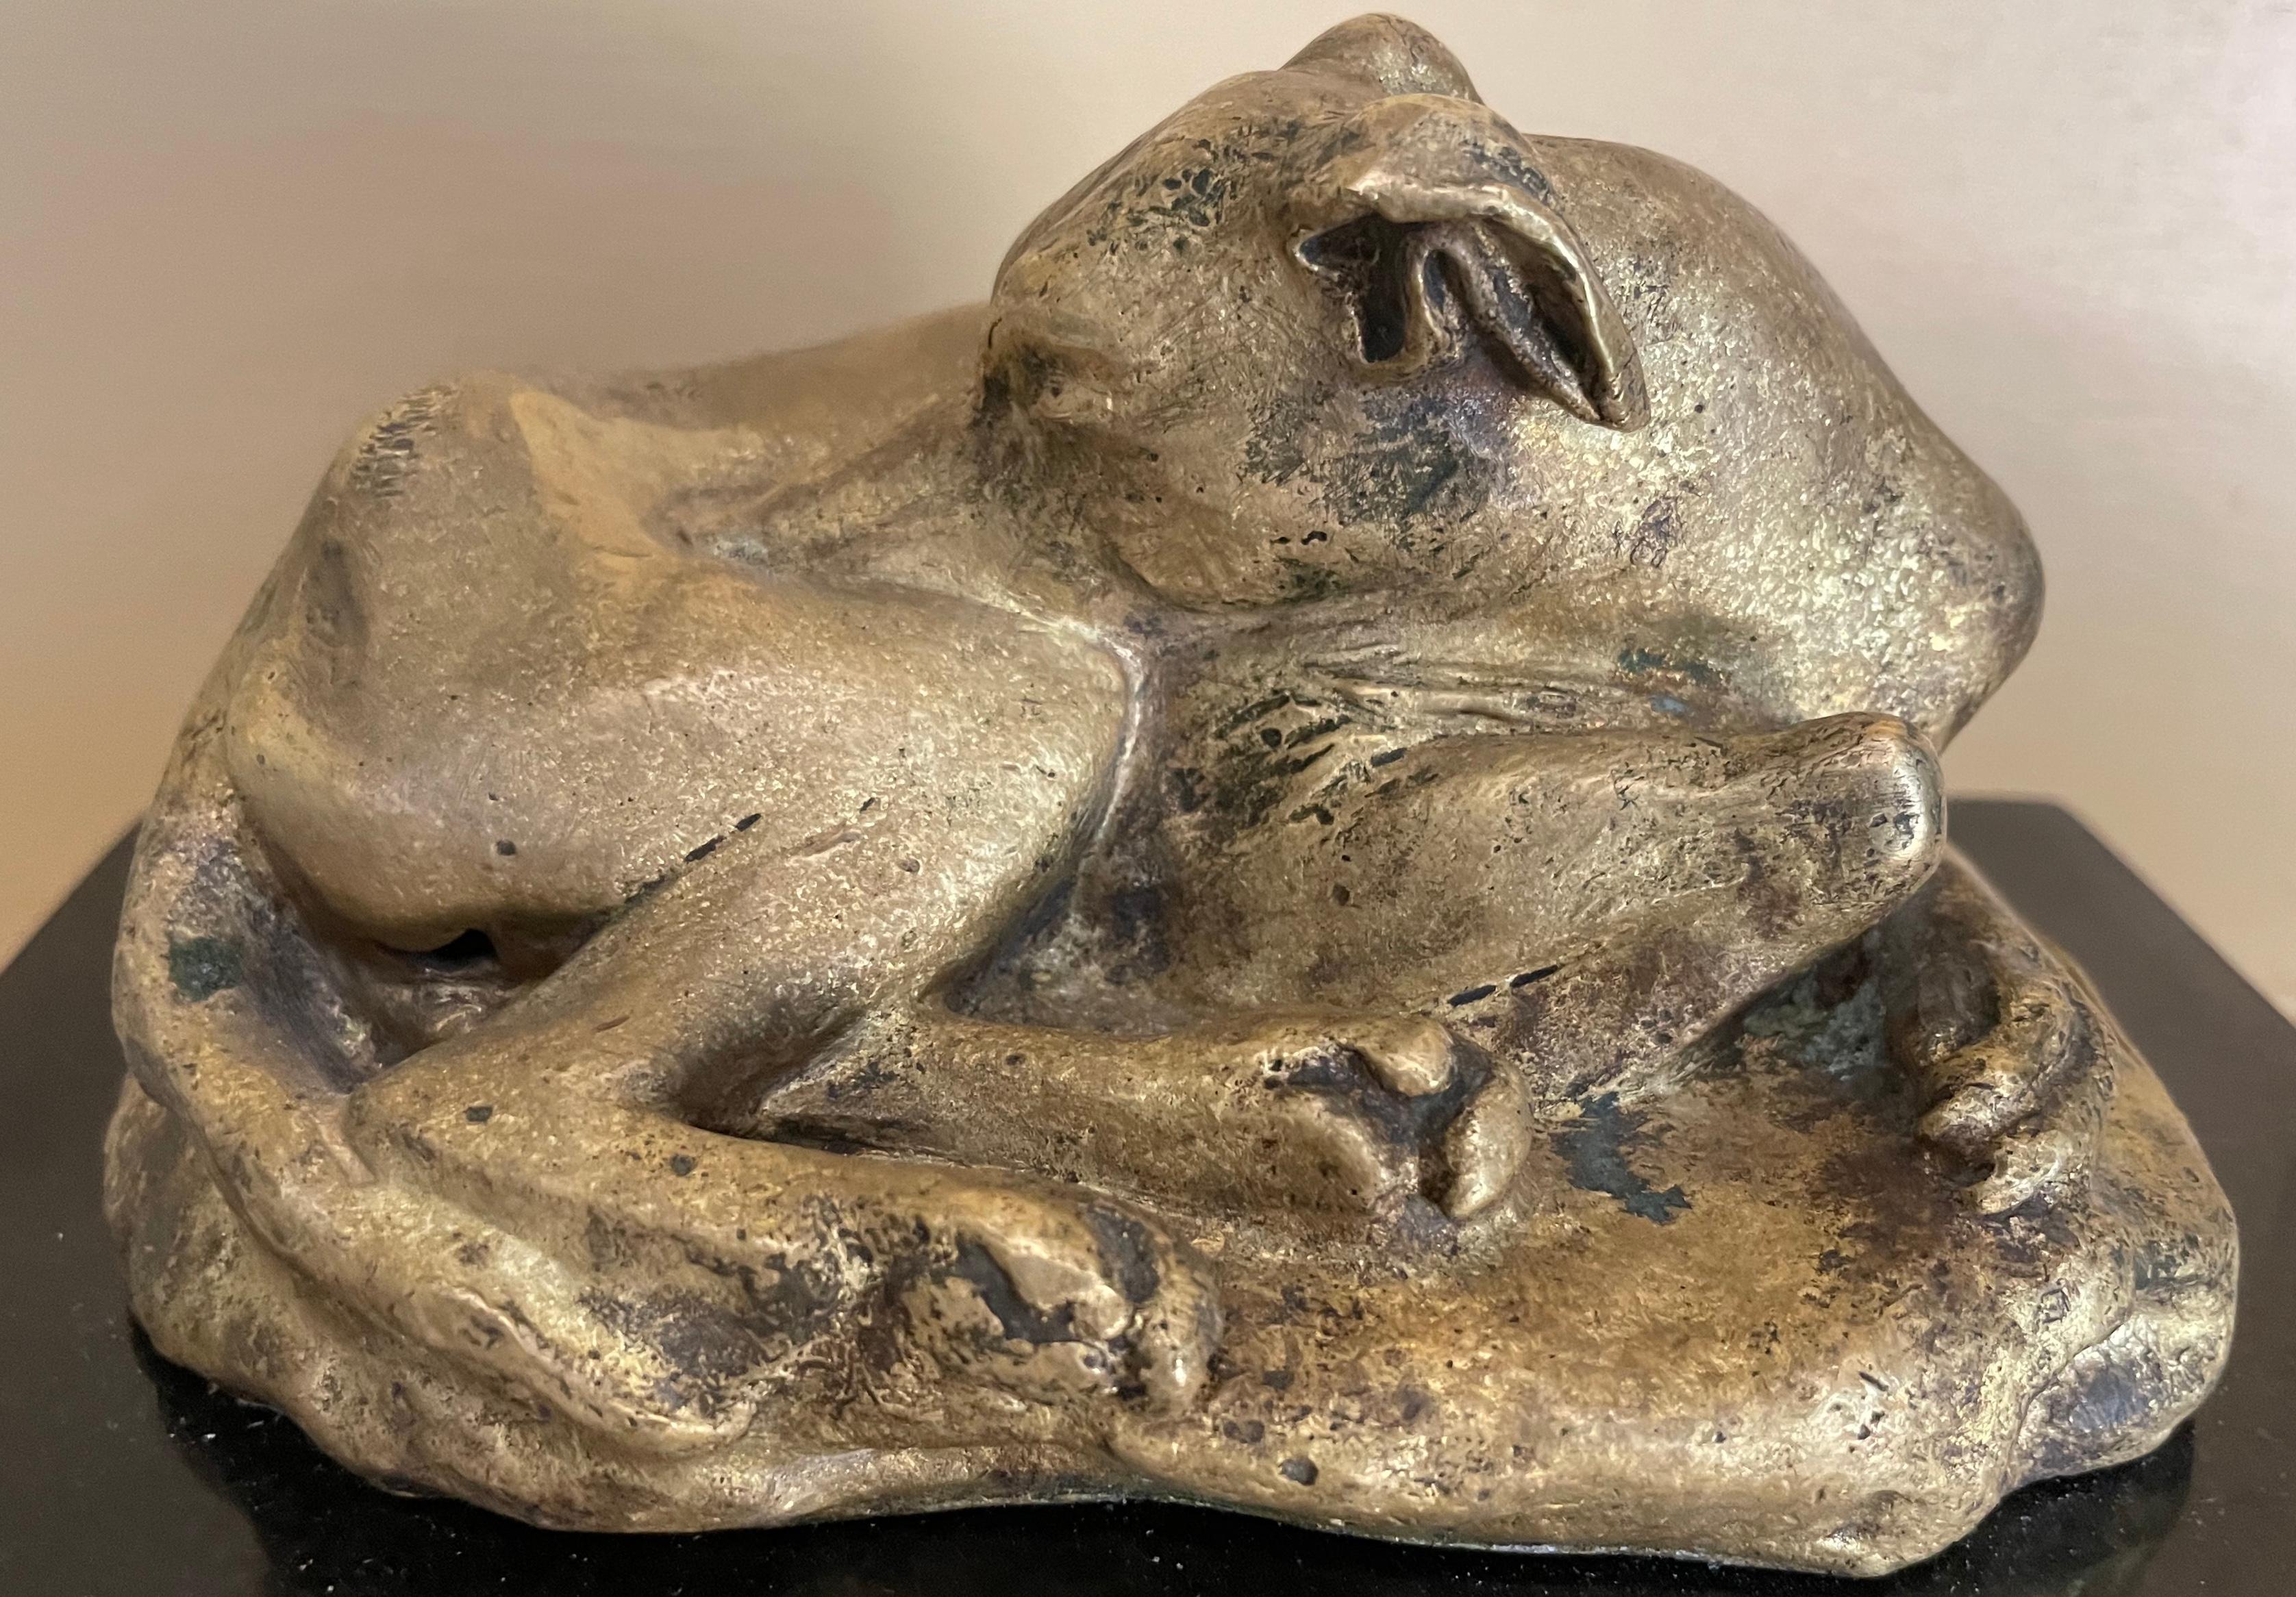 Gilt-bronze greyhound dog sculpture. Elegant Italian greyhound whippet resting on a roughly modeled rock base in soft gold patinated bronze on thick black marble base. Stamped at front, “Fond. Art. Laganà Napoli”. Italy, first quarter 20th century.